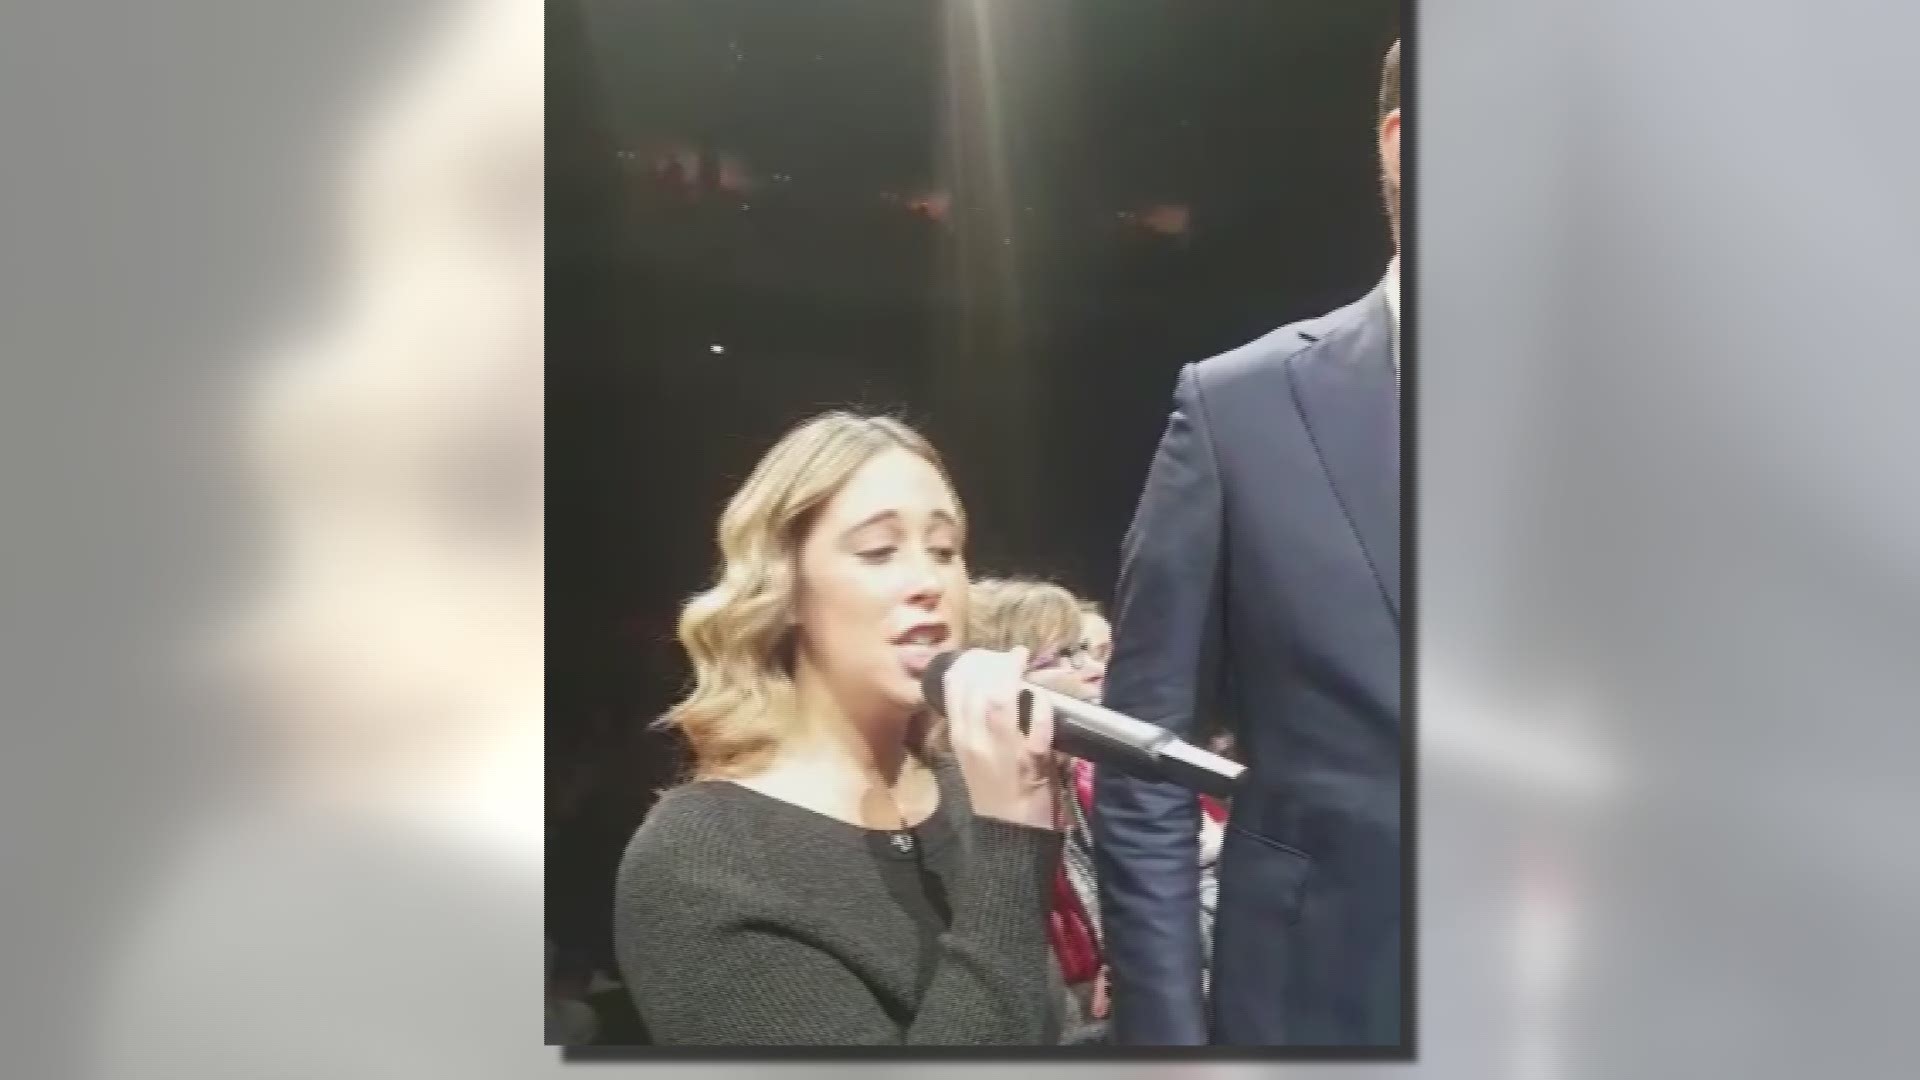 Local girl surprise sings with Michael Buble during concert in Buffalo